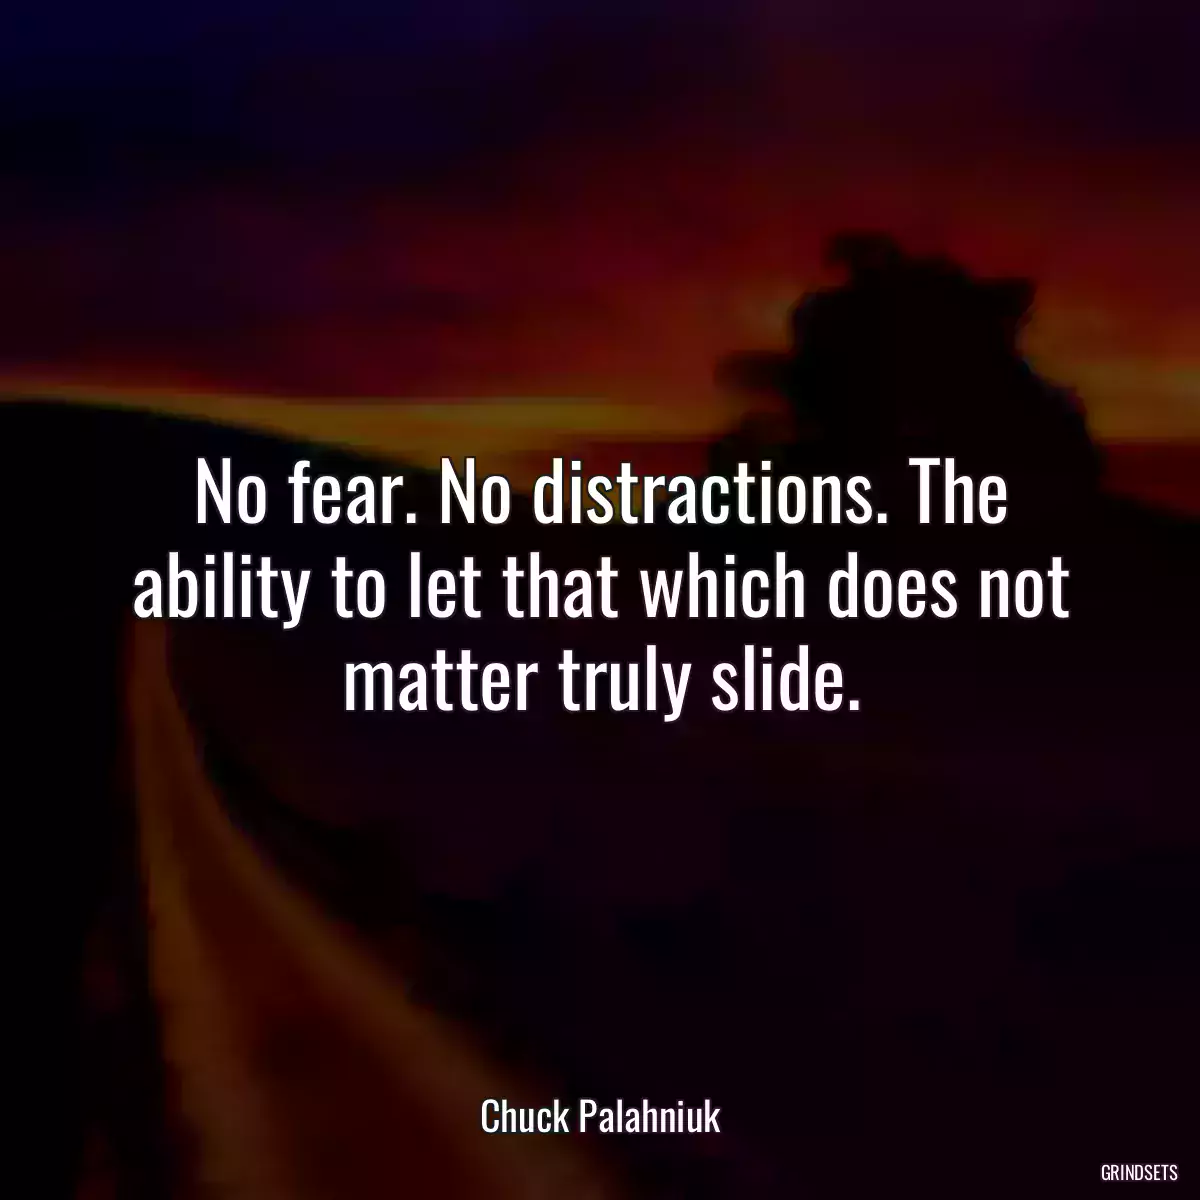 No fear. No distractions. The ability to let that which does not matter truly slide.